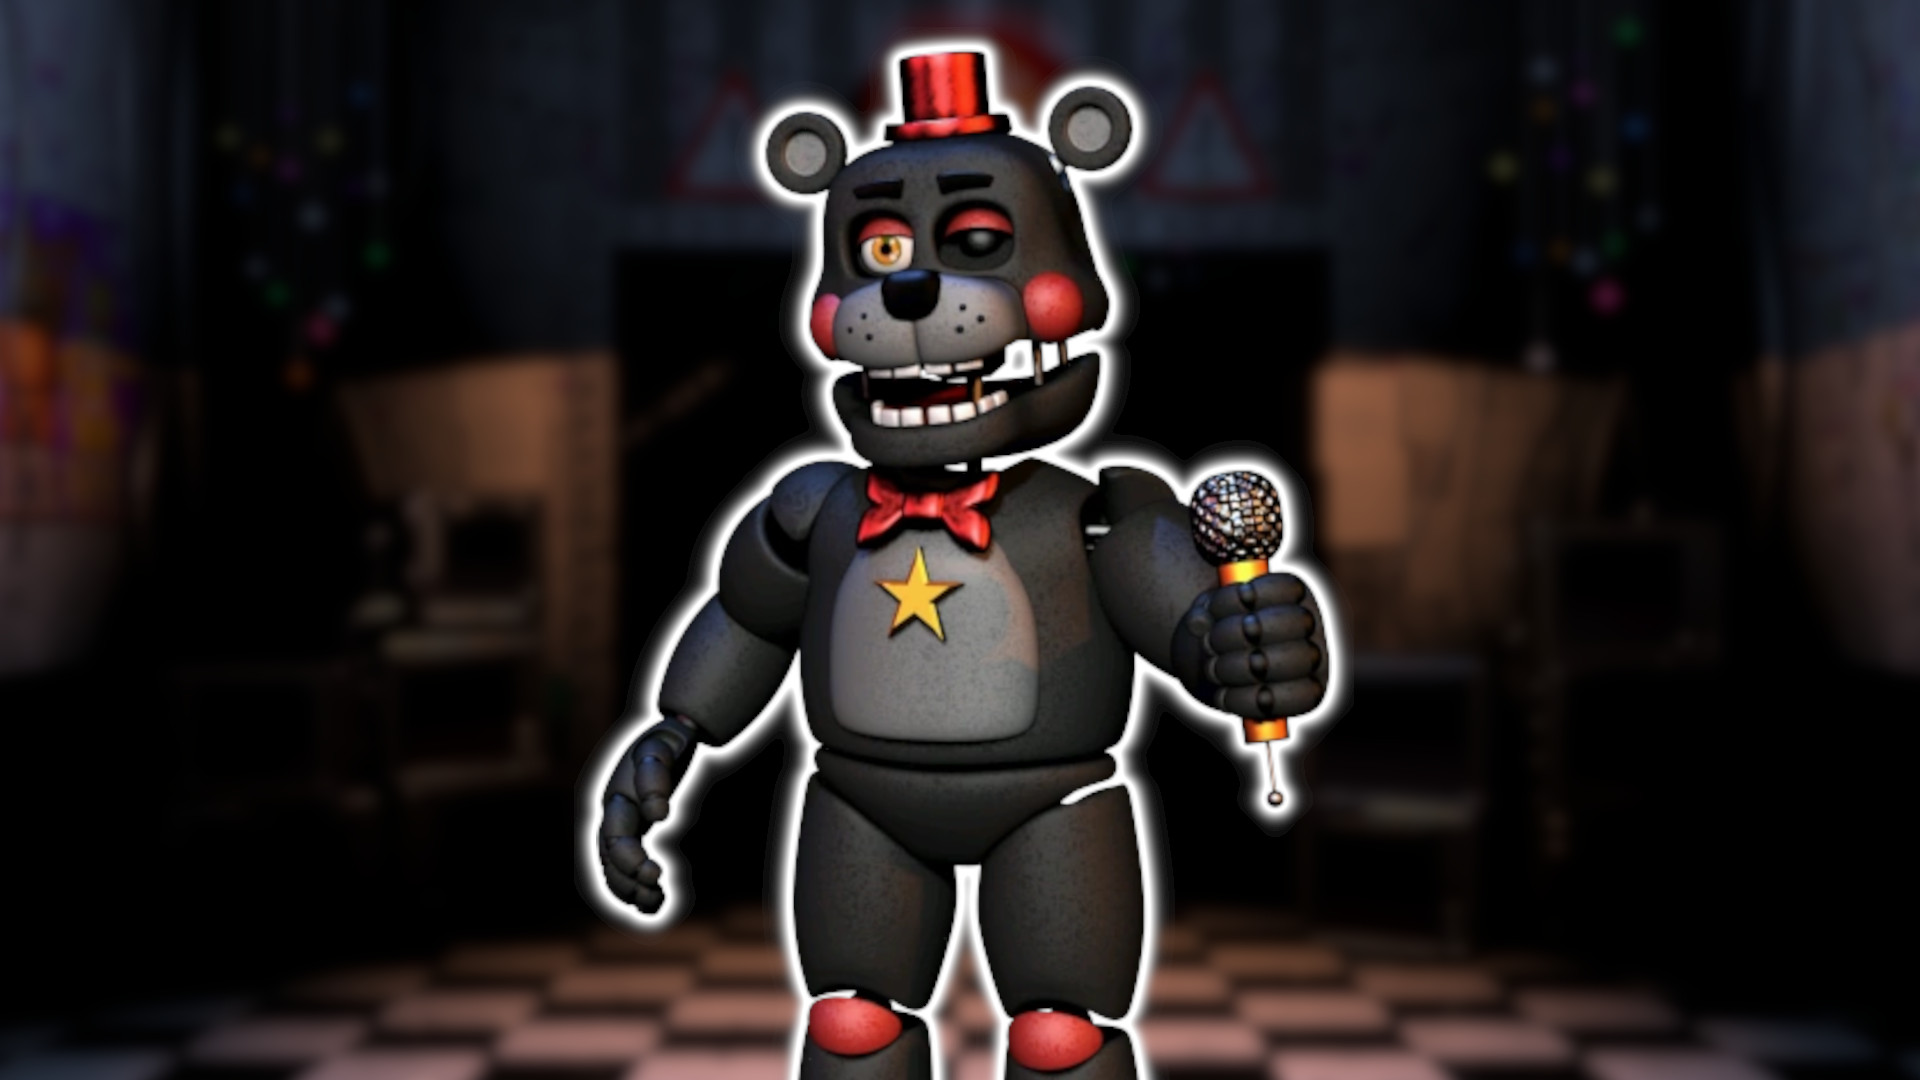 FNAF Puppet – lore, versions, and appearances